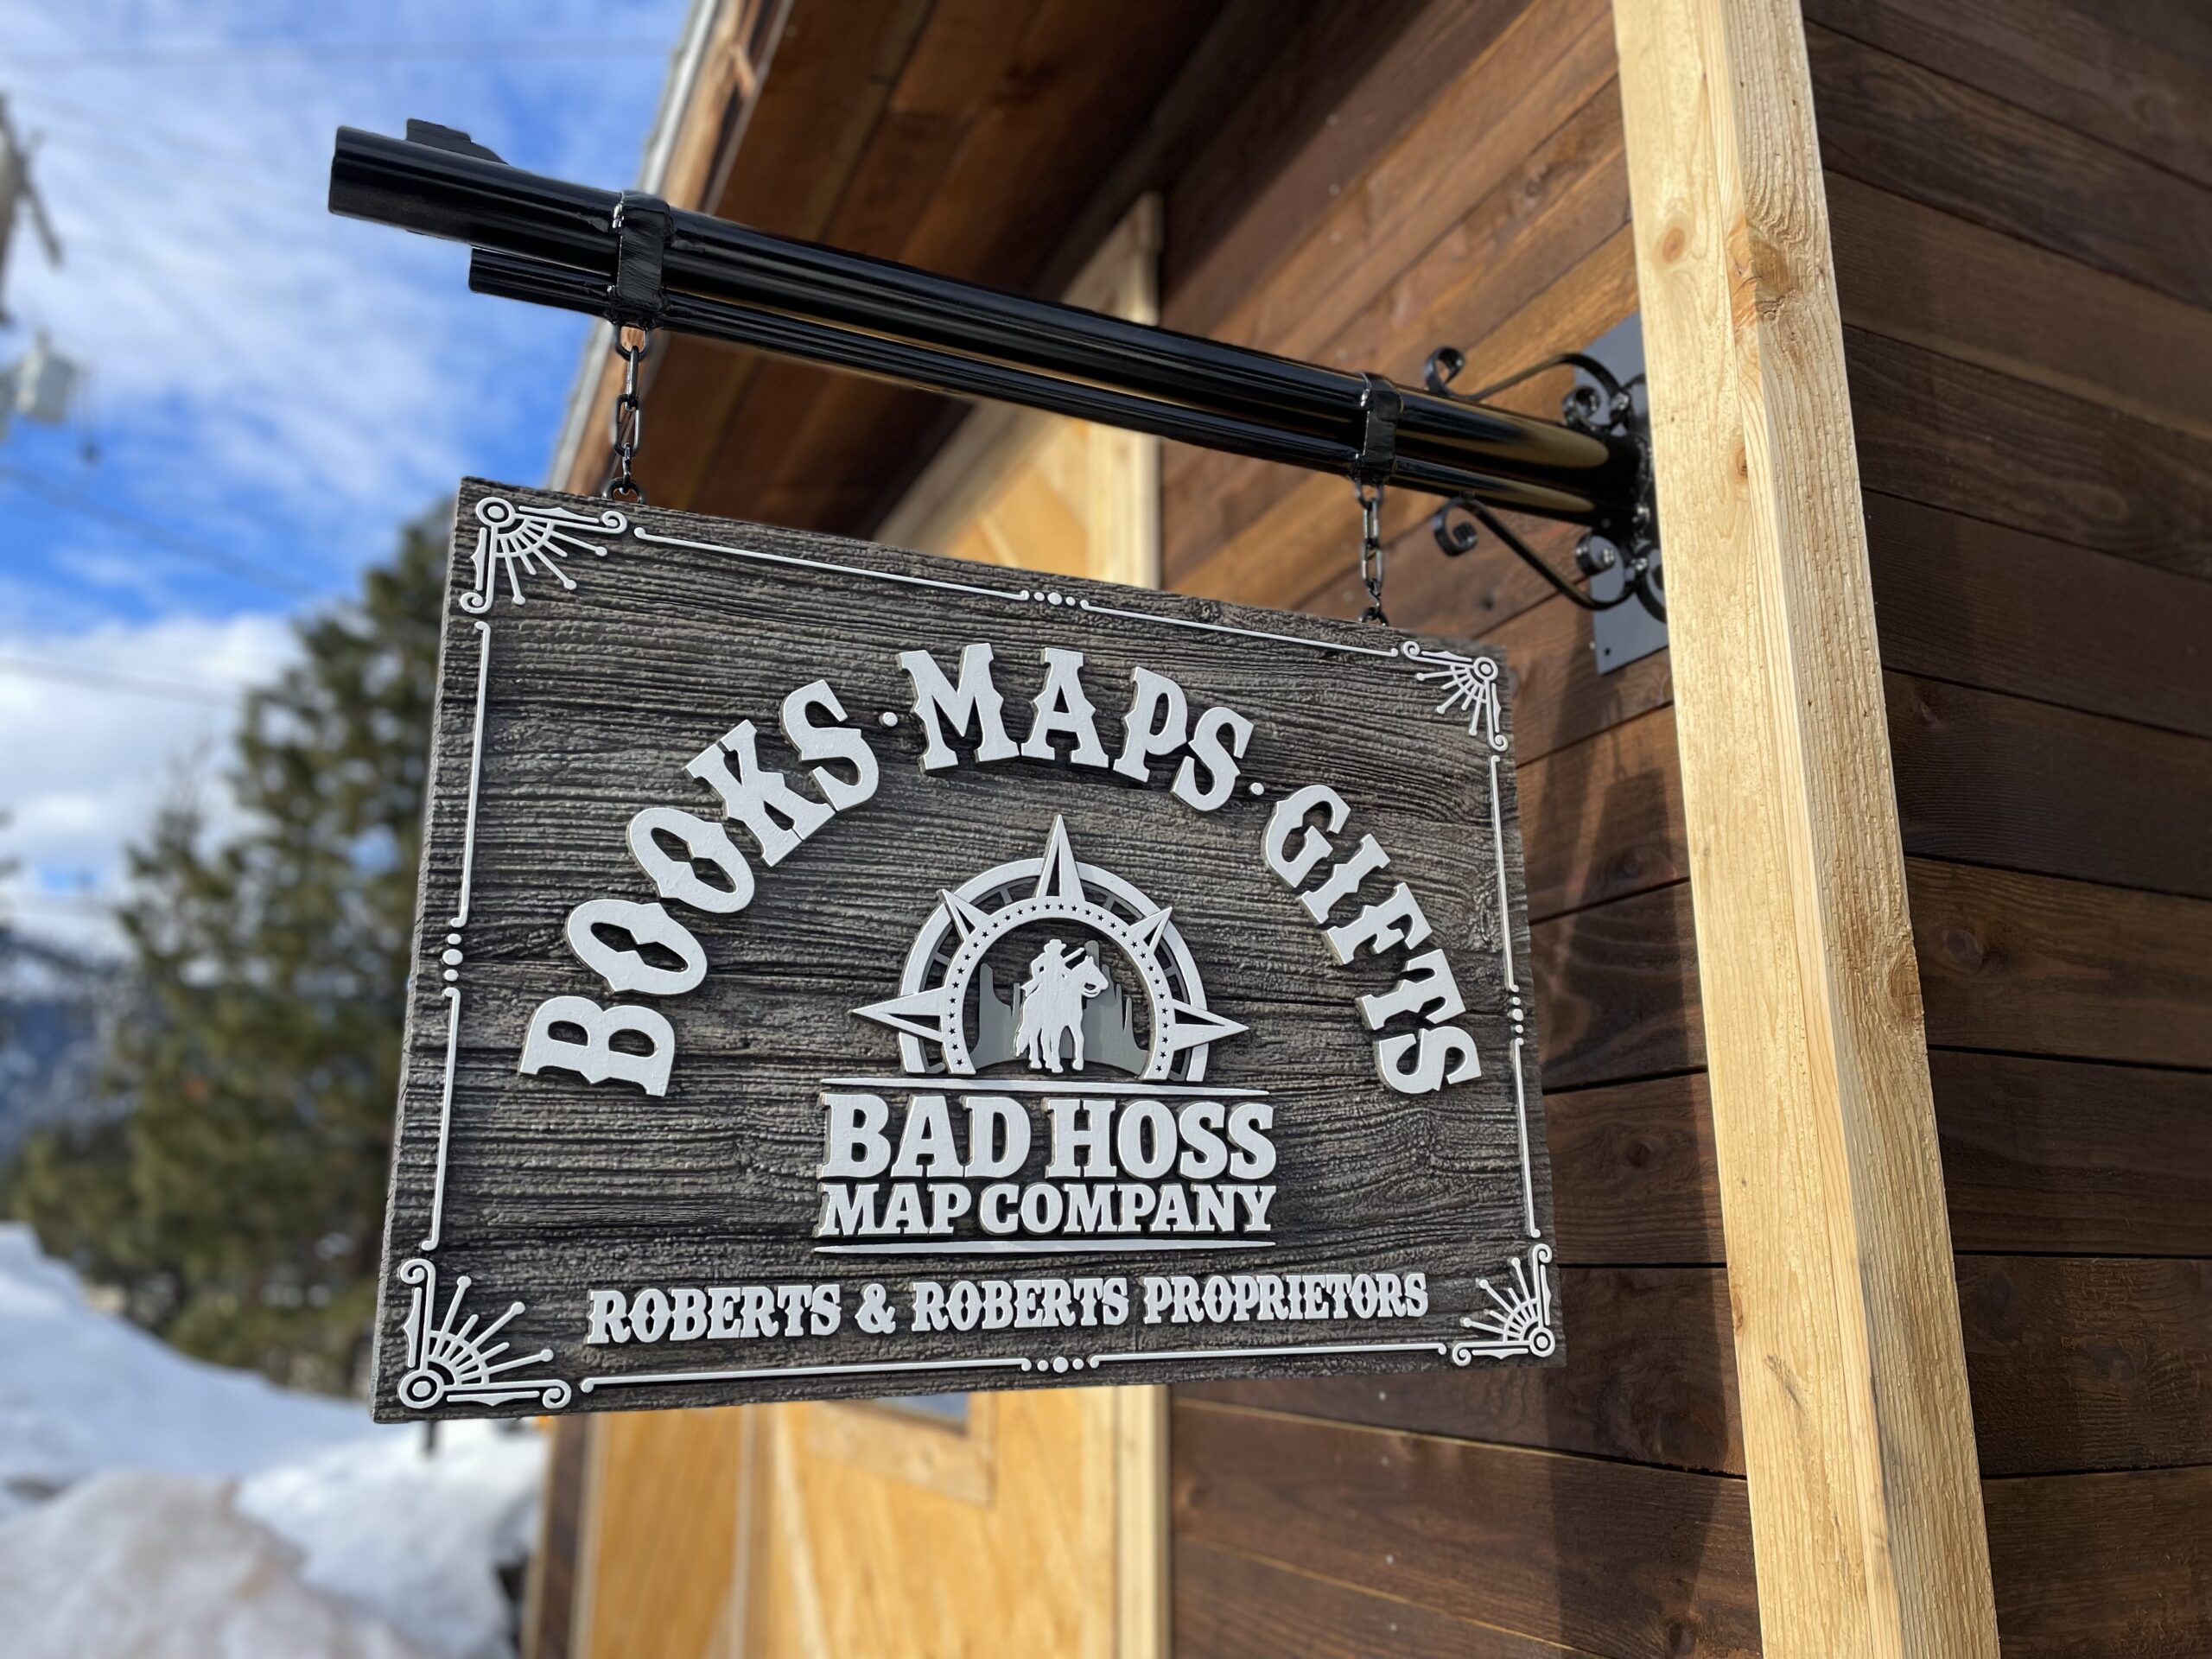 A rustic sign that looks like wood hanging from a metal bracket that looks like a gun barrel.